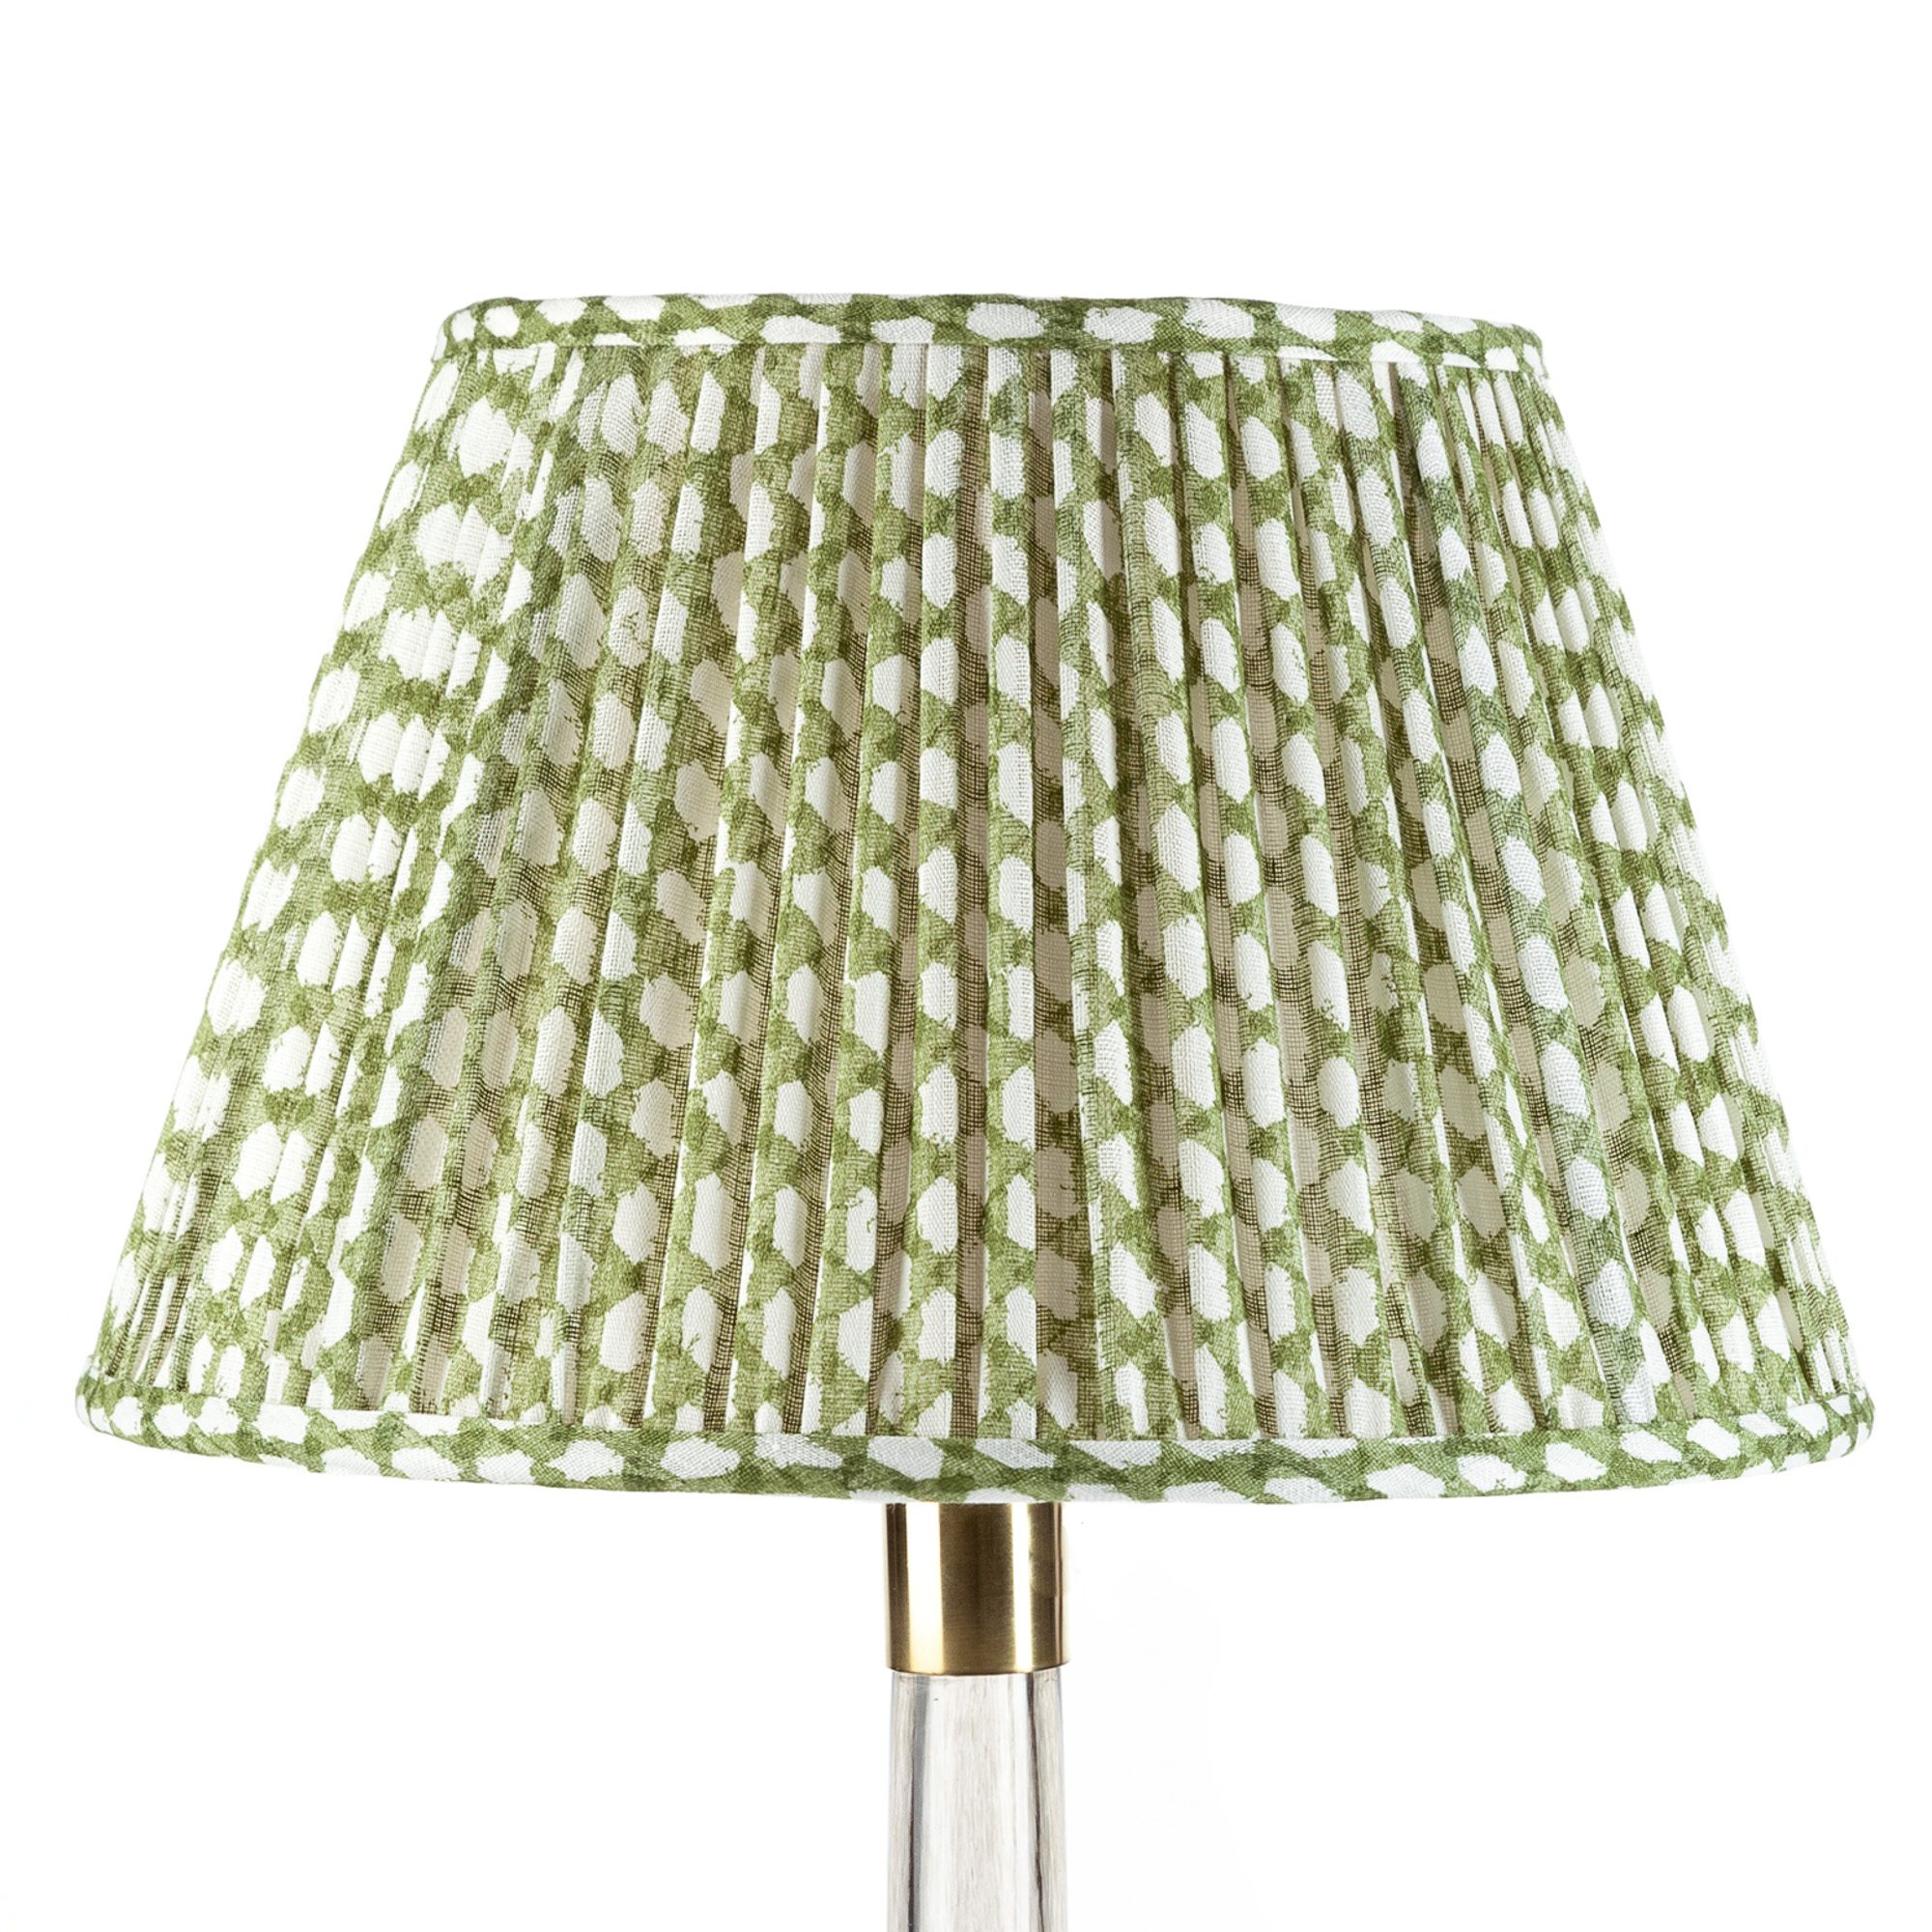 pg-024-empire-gathered-lampshade-in-green-wicker-024-1